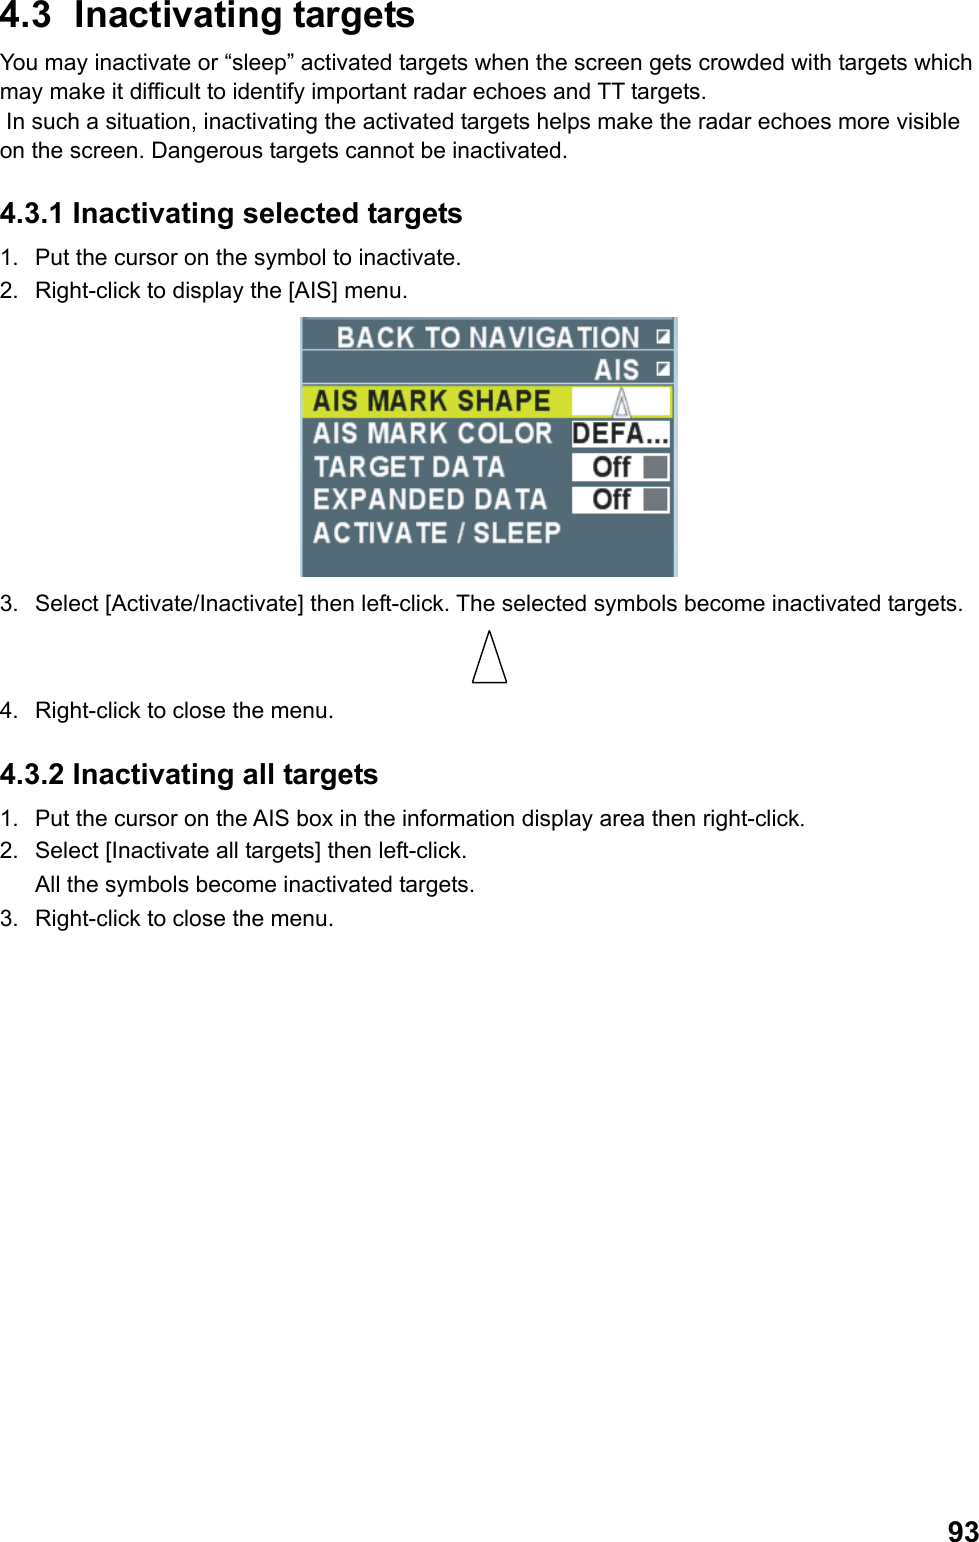  934.3 Inactivating targets You may inactivate or “sleep” activated targets when the screen gets crowded with targets which may make it difficult to identify important radar echoes and TT targets.   In such a situation, inactivating the activated targets helps make the radar echoes more visible on the screen. Dangerous targets cannot be inactivated. 4.3.1 Inactivating selected targets 1.  Put the cursor on the symbol to inactivate. 2.  Right-click to display the [AIS] menu.  3.  Select [Activate/Inactivate] then left-click. The selected symbols become inactivated targets.  4.  Right-click to close the menu. 4.3.2 Inactivating all targets 1.  Put the cursor on the AIS box in the information display area then right-click. 2.  Select [Inactivate all targets] then left-click. All the symbols become inactivated targets. 3.  Right-click to close the menu. 